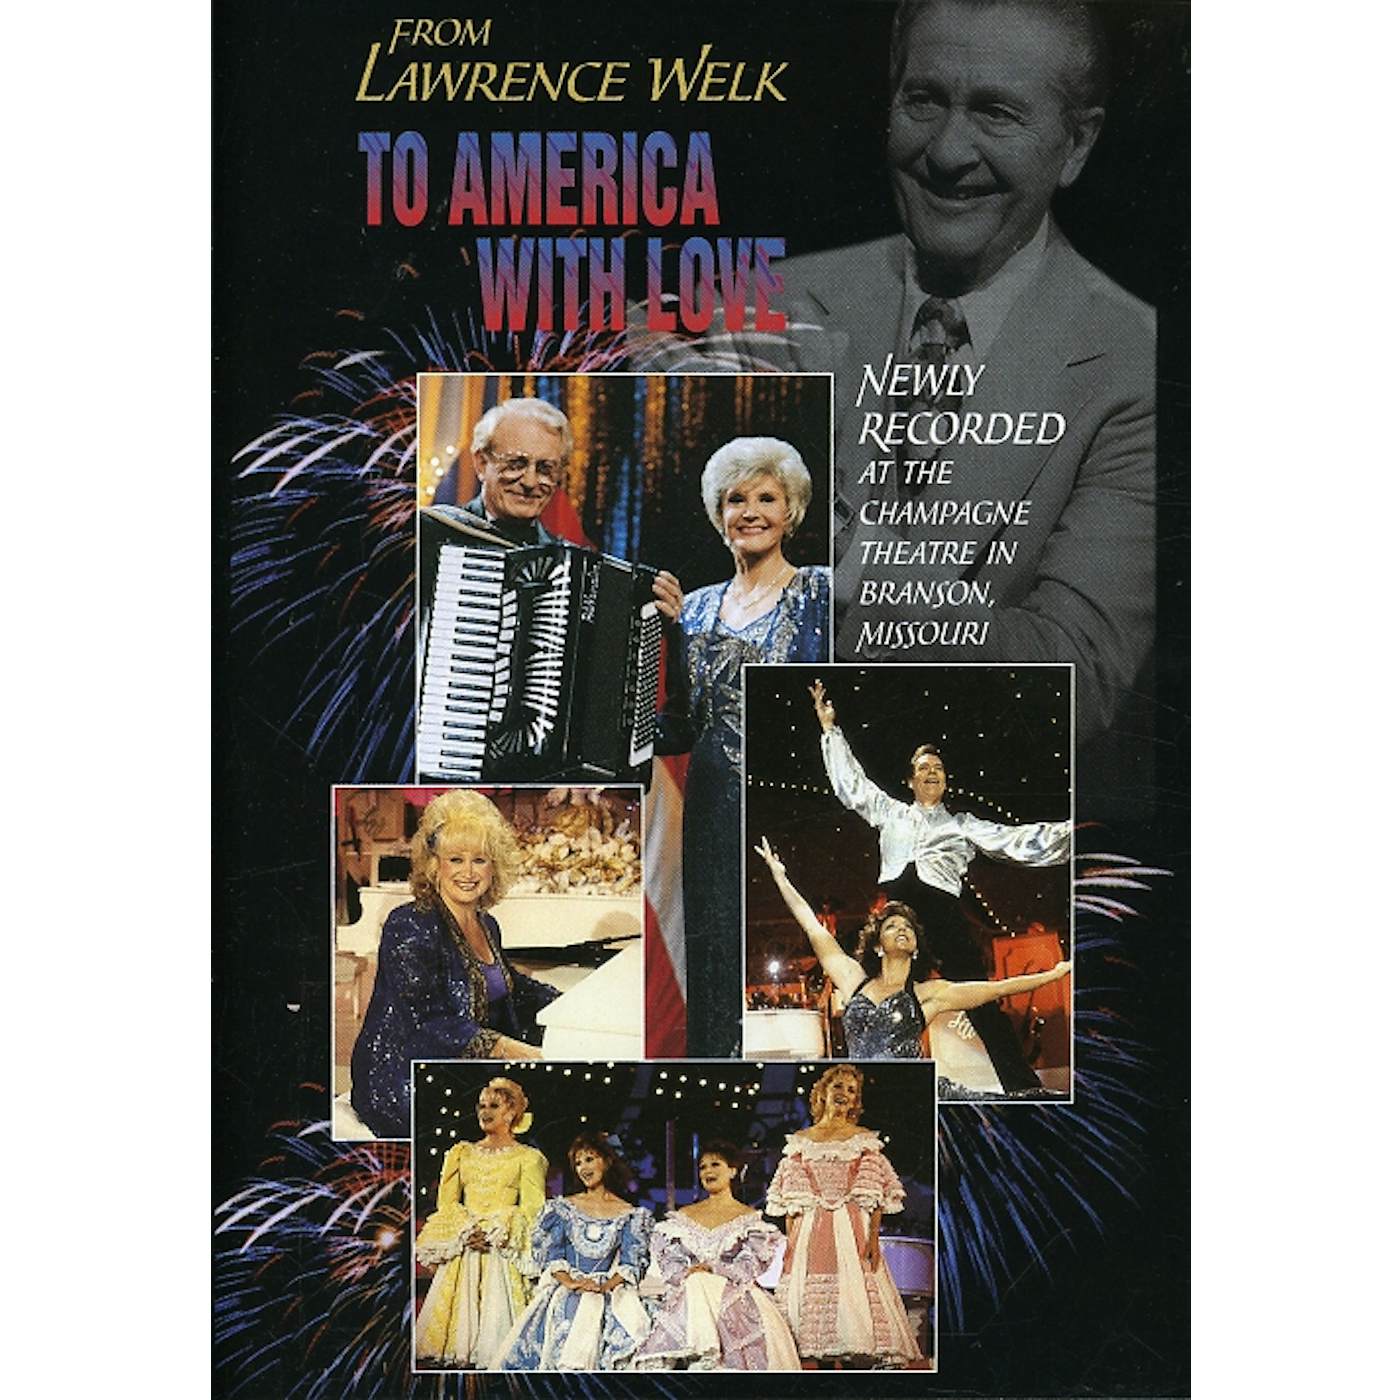 FROM LAWRENCE WELK TO AMERICA WITH LOVE DVD